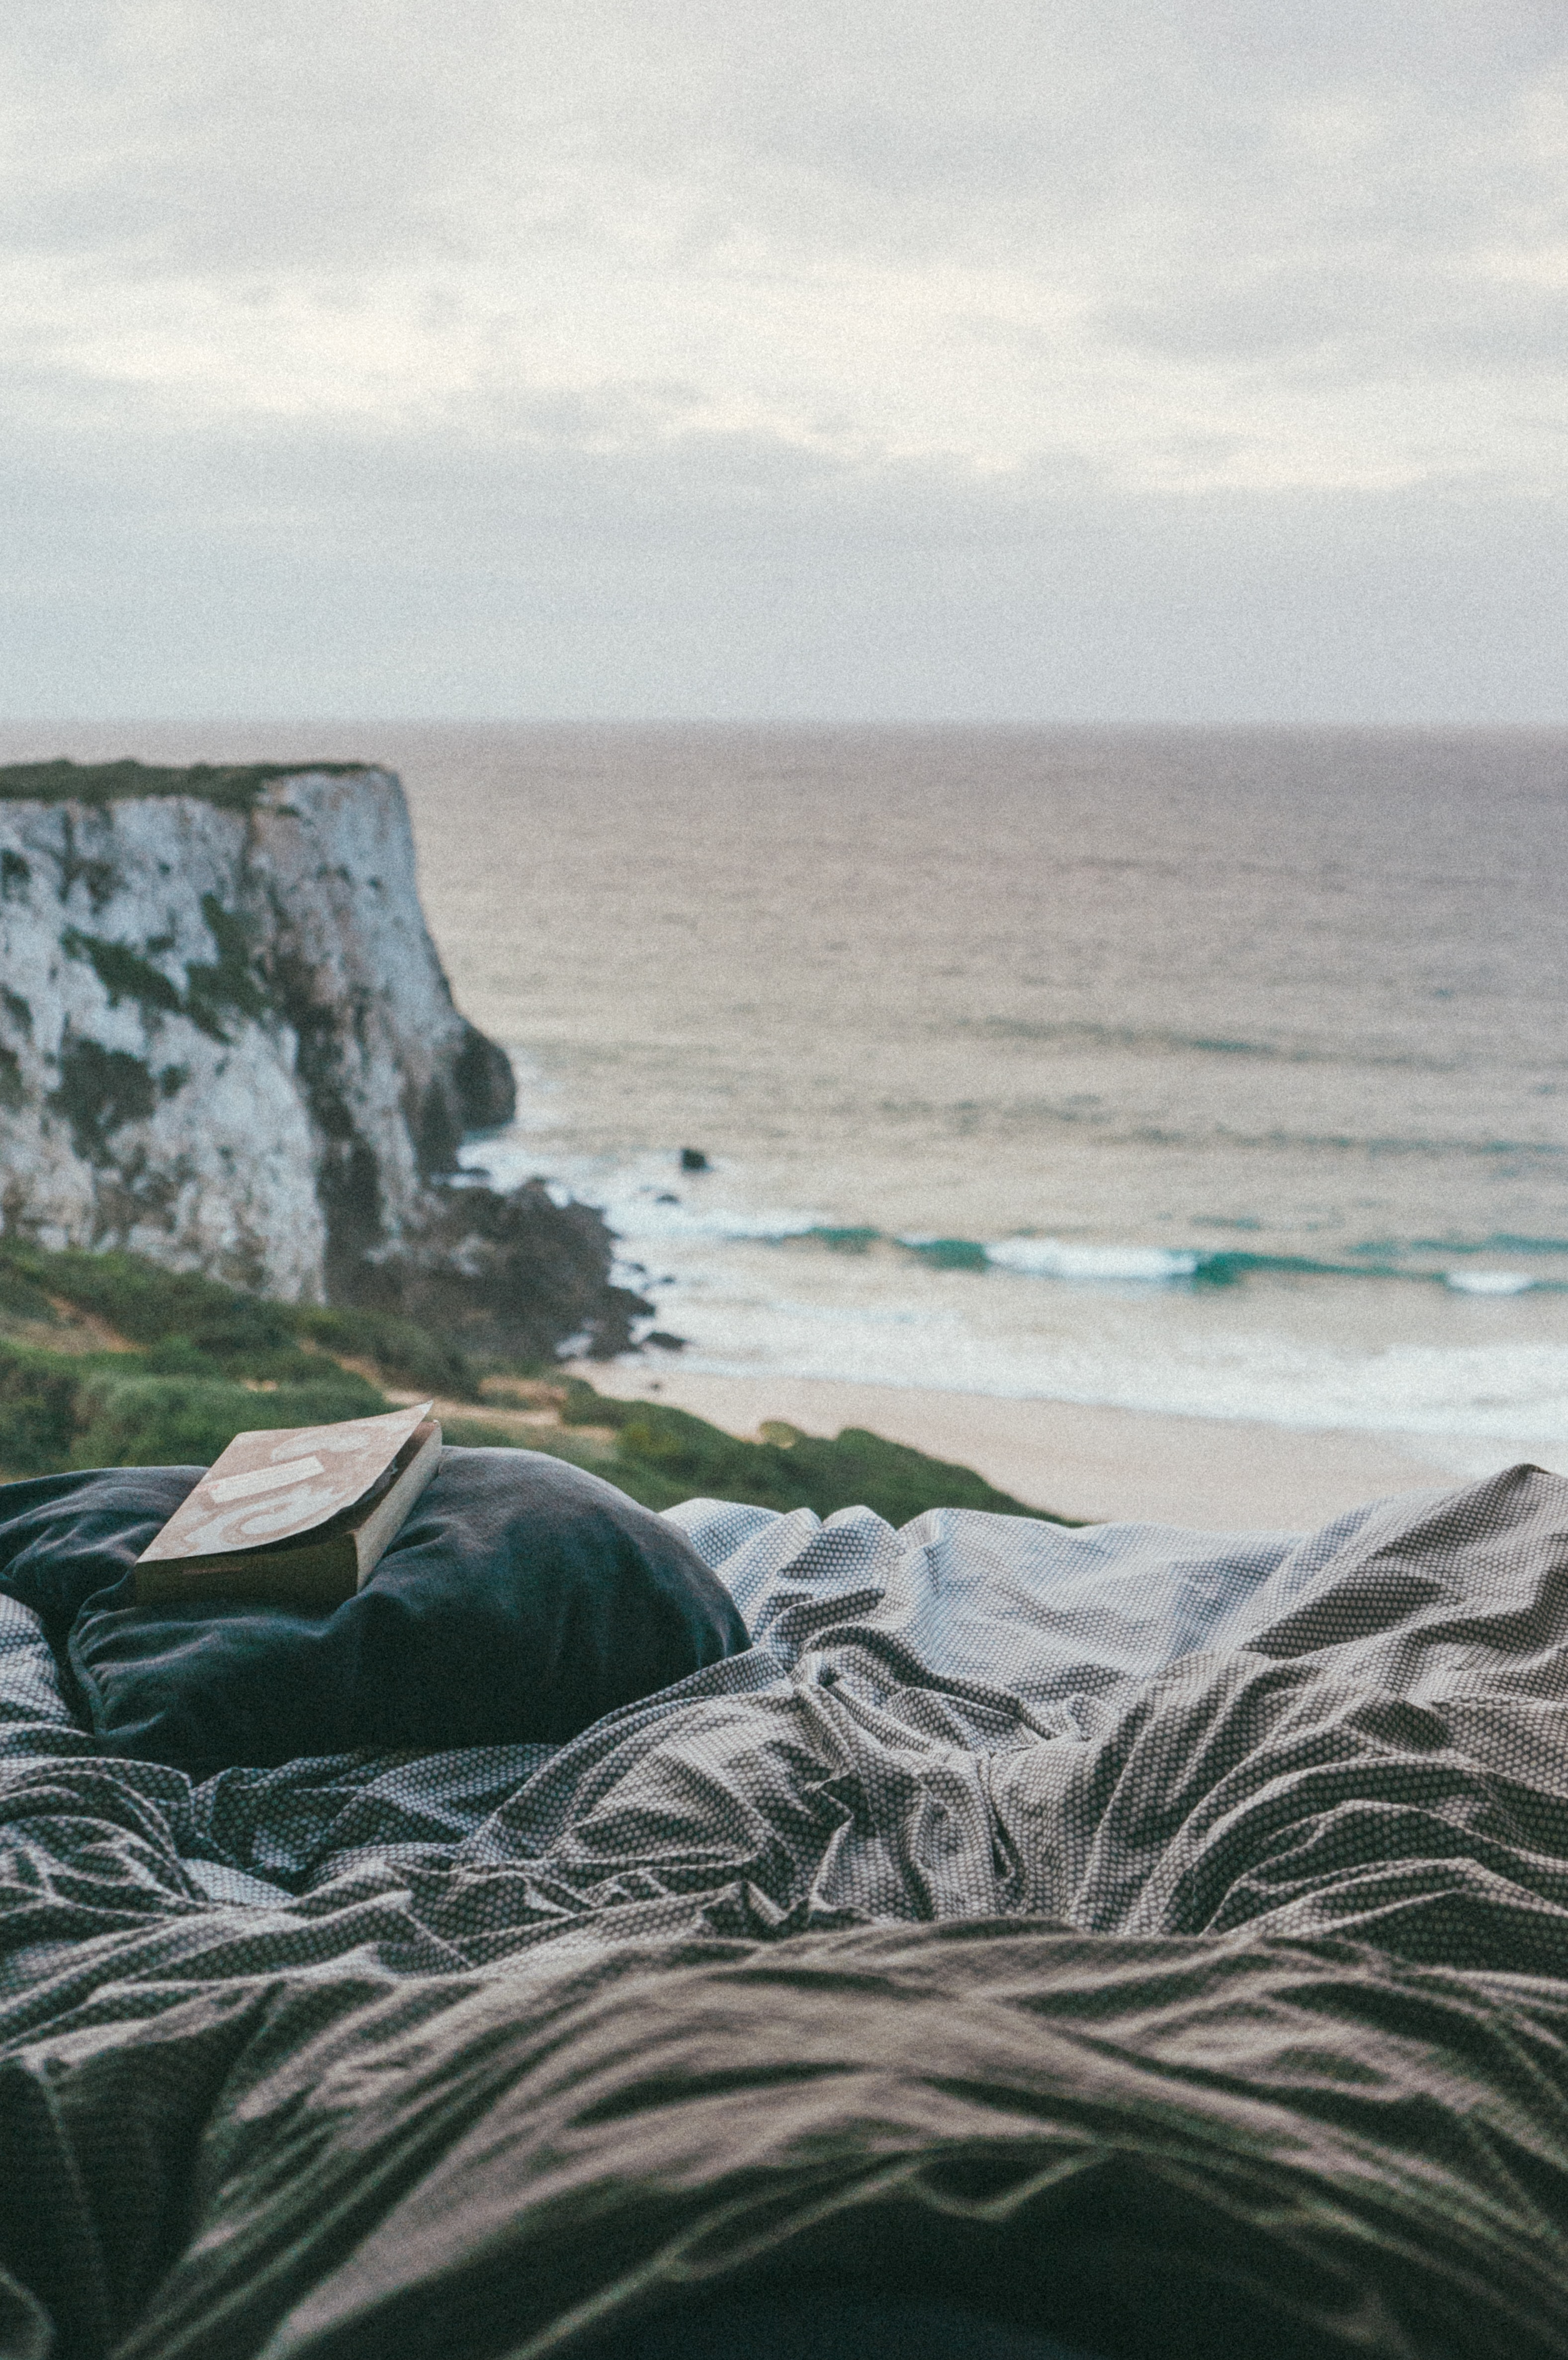 A cozy nest of blankets in which a reading person sits, right on the cliffs overlooking the sea.